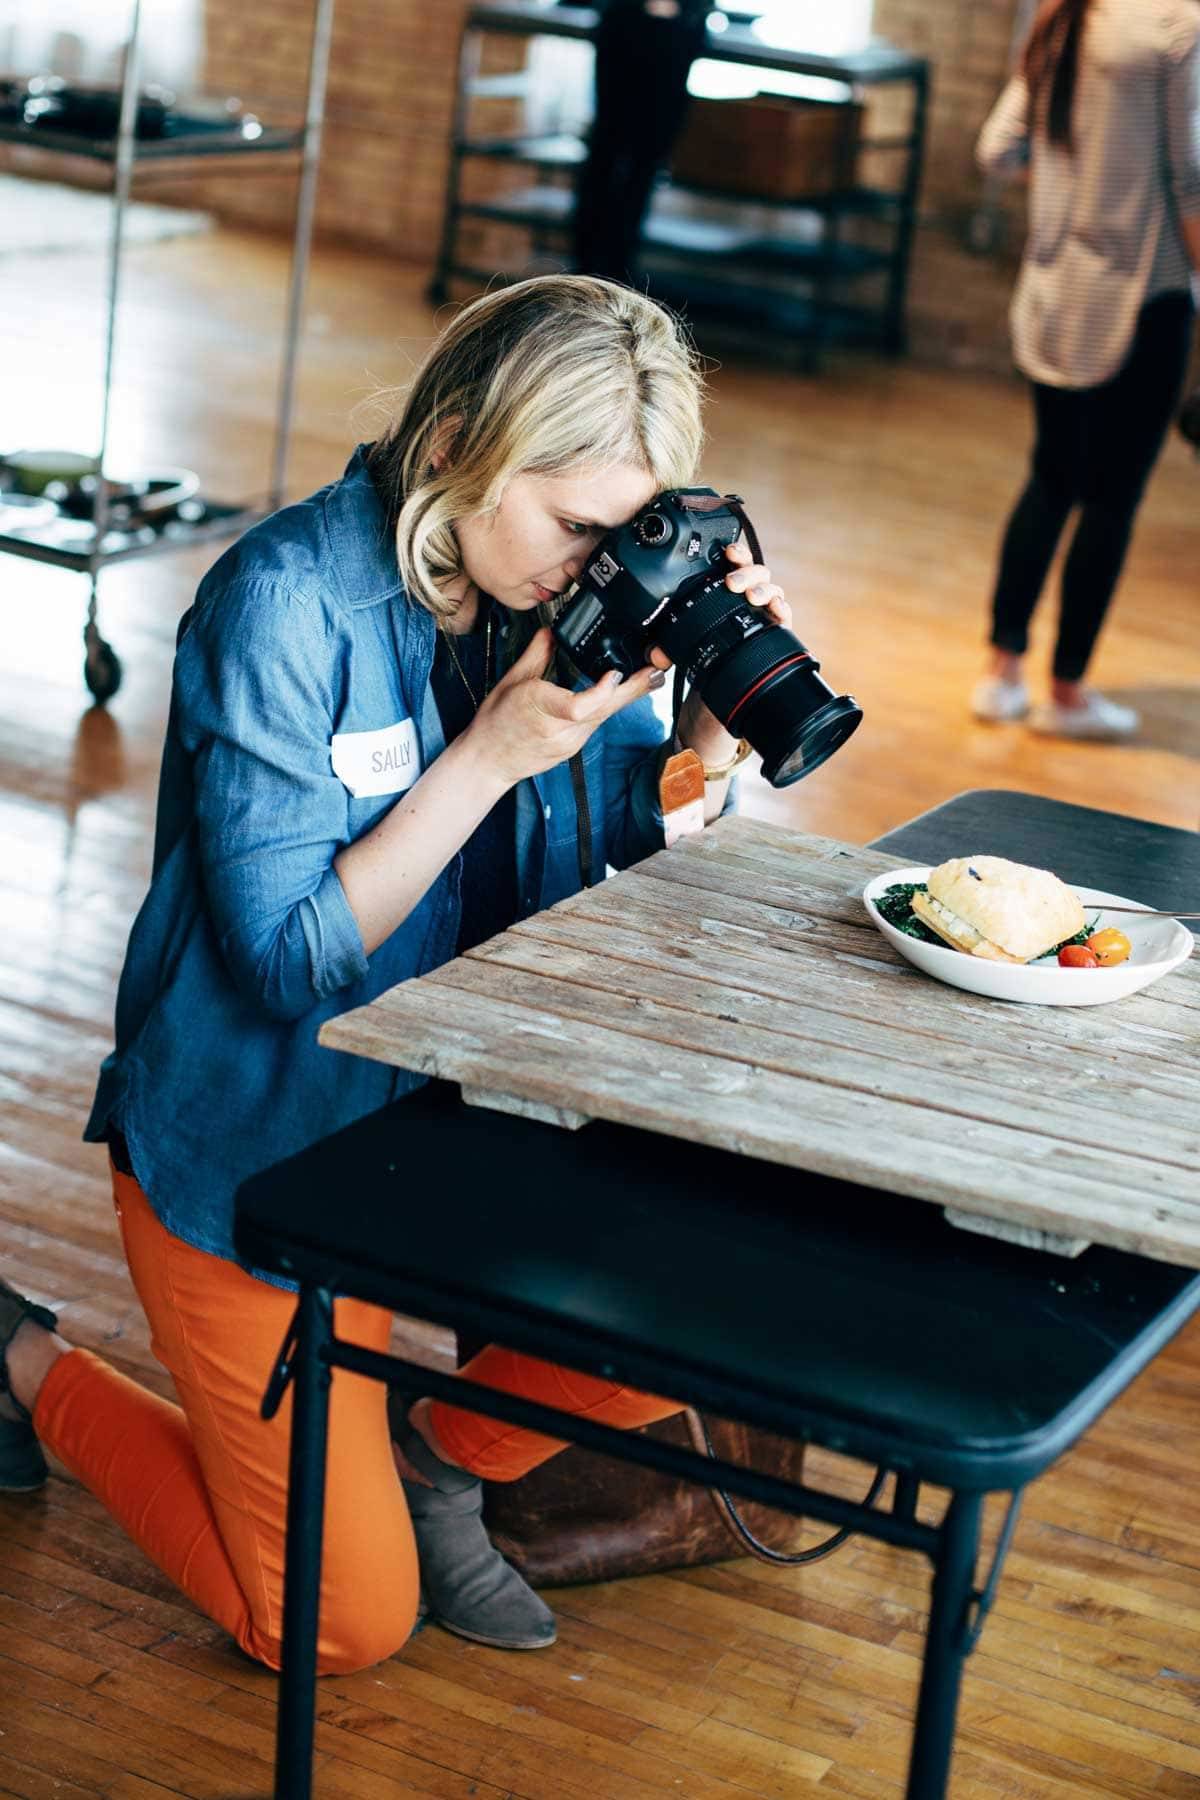 Woman photographing food with a camera.